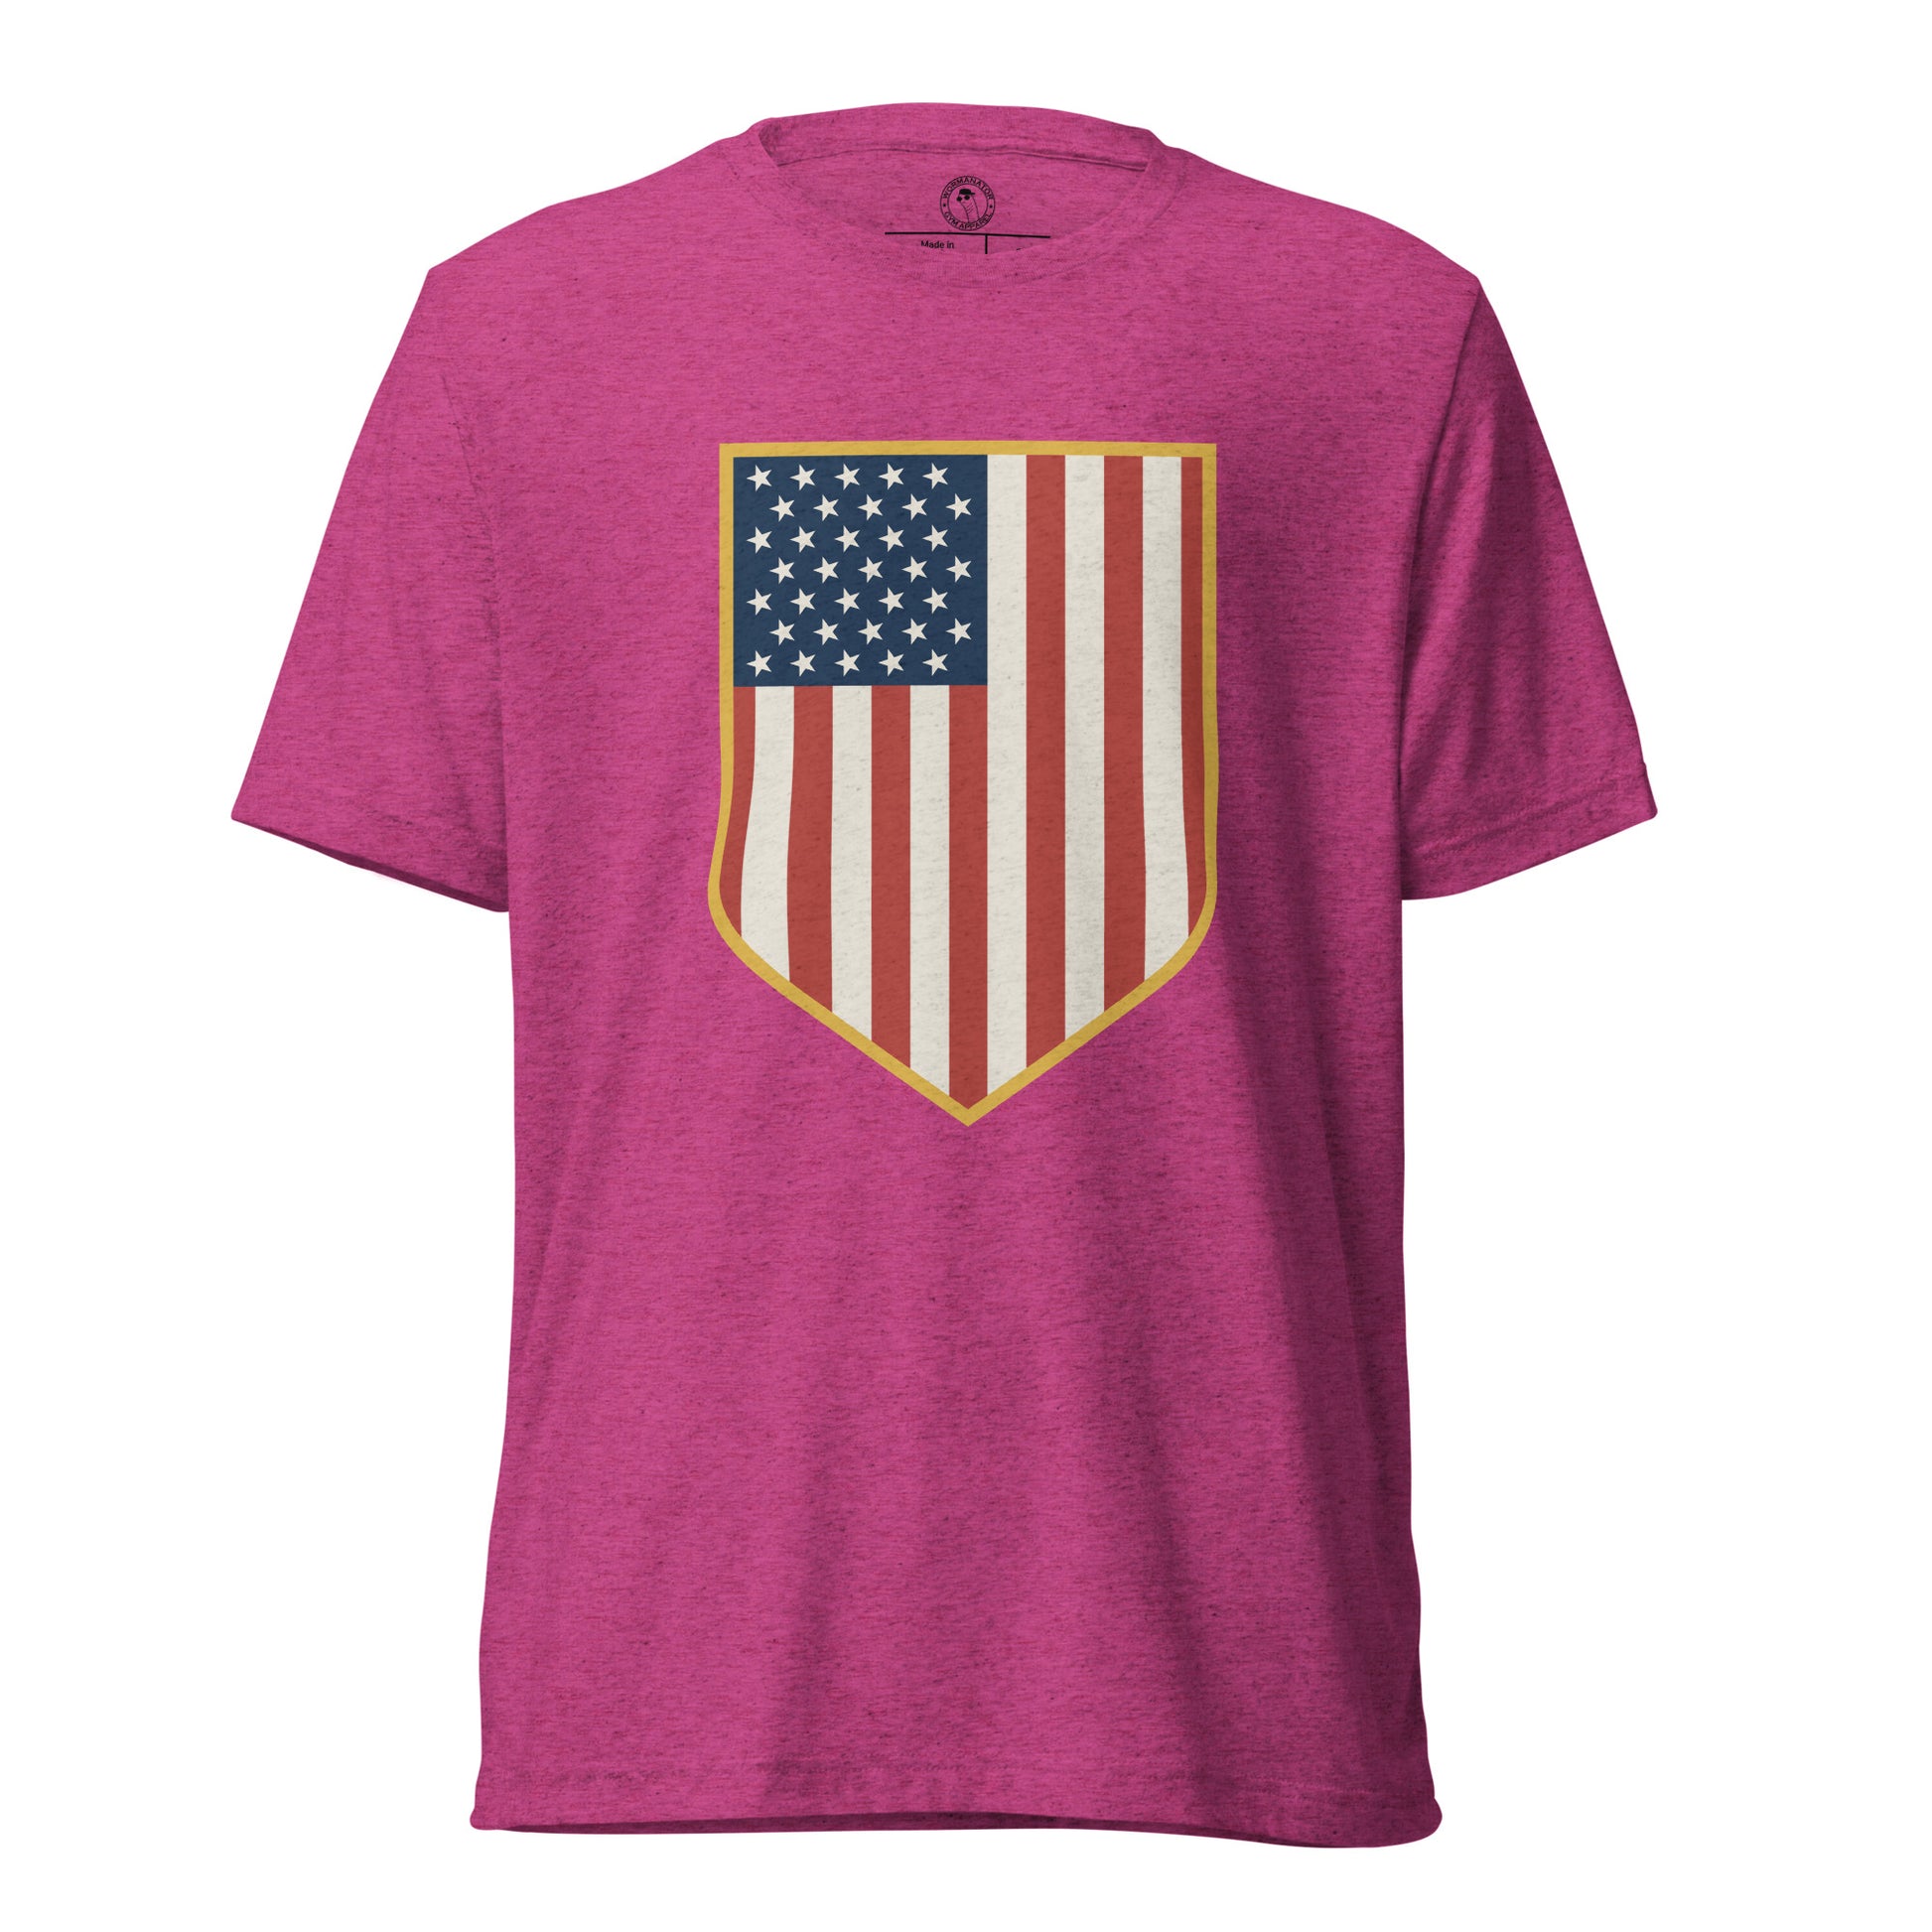 General Patton Shirt in Berry Triblend